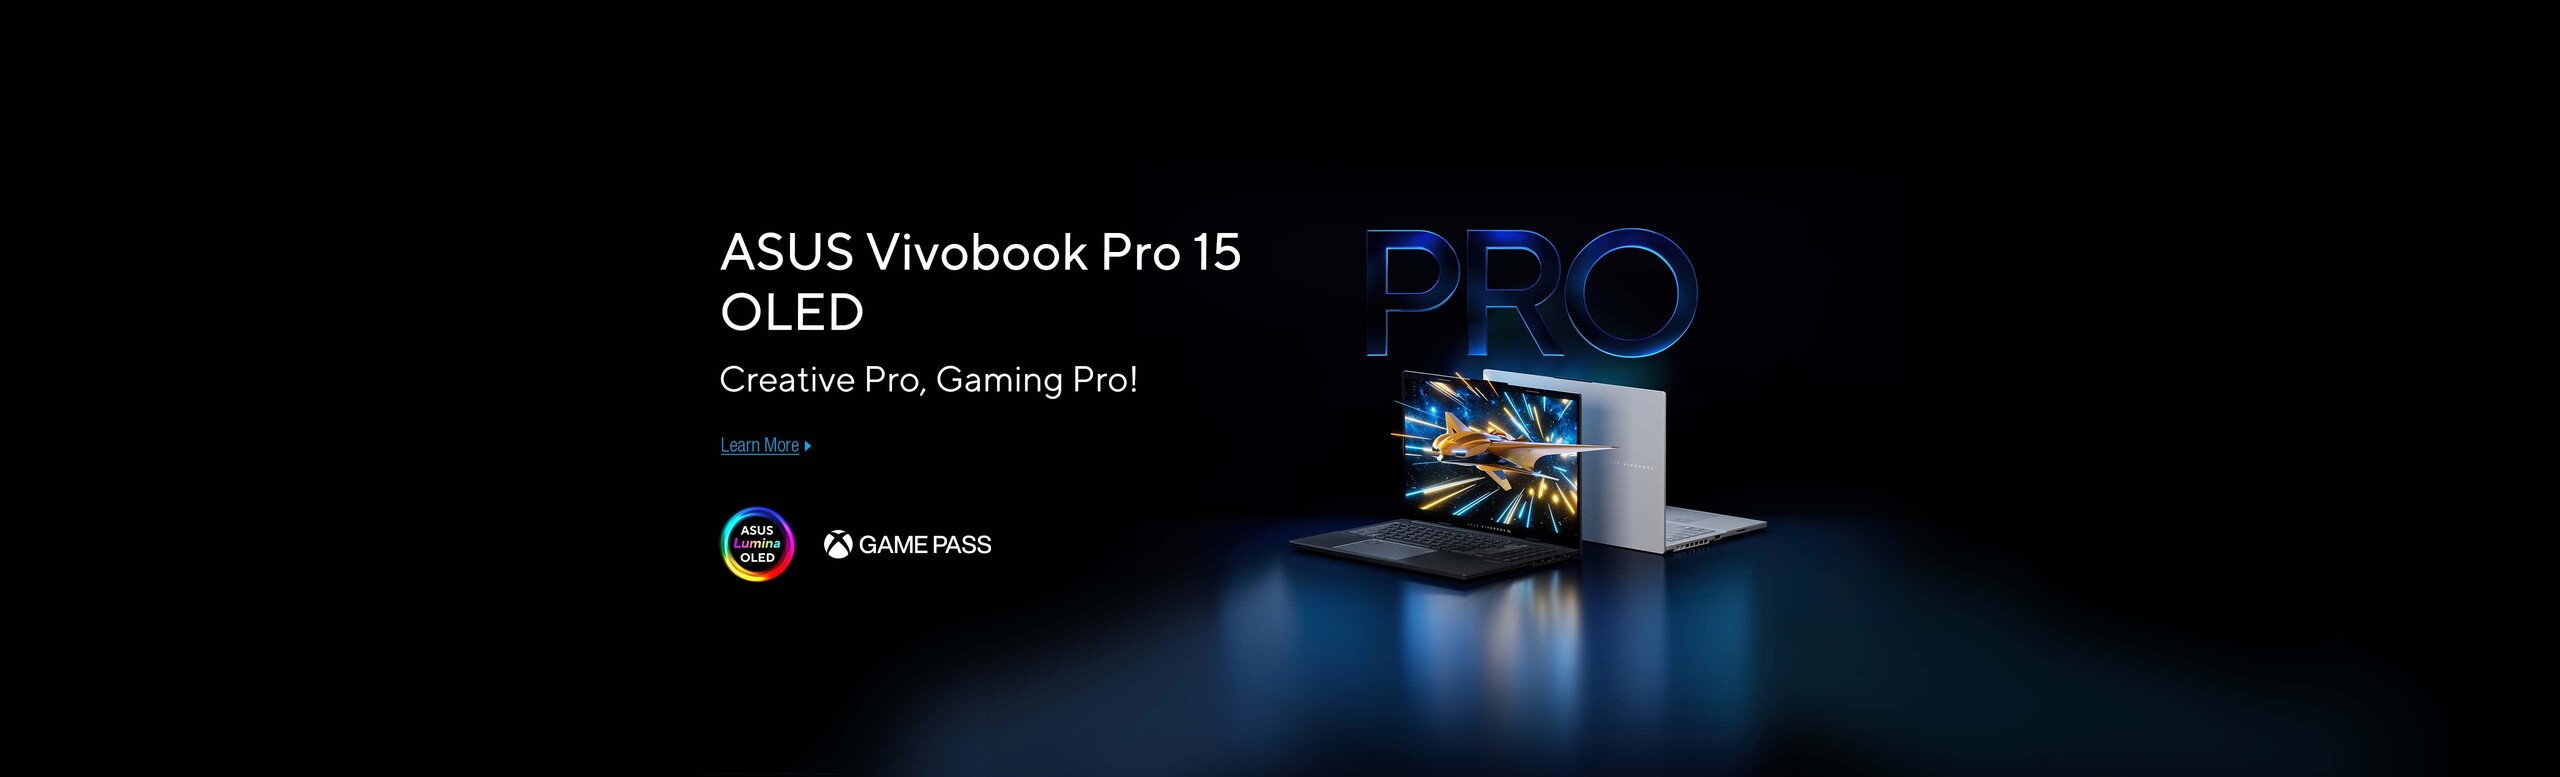 ASUS Vivobook Pro 15 OLED Creative Pro, Gaming Pro! Learn More logo Asus Lumina OLED and Game Pass